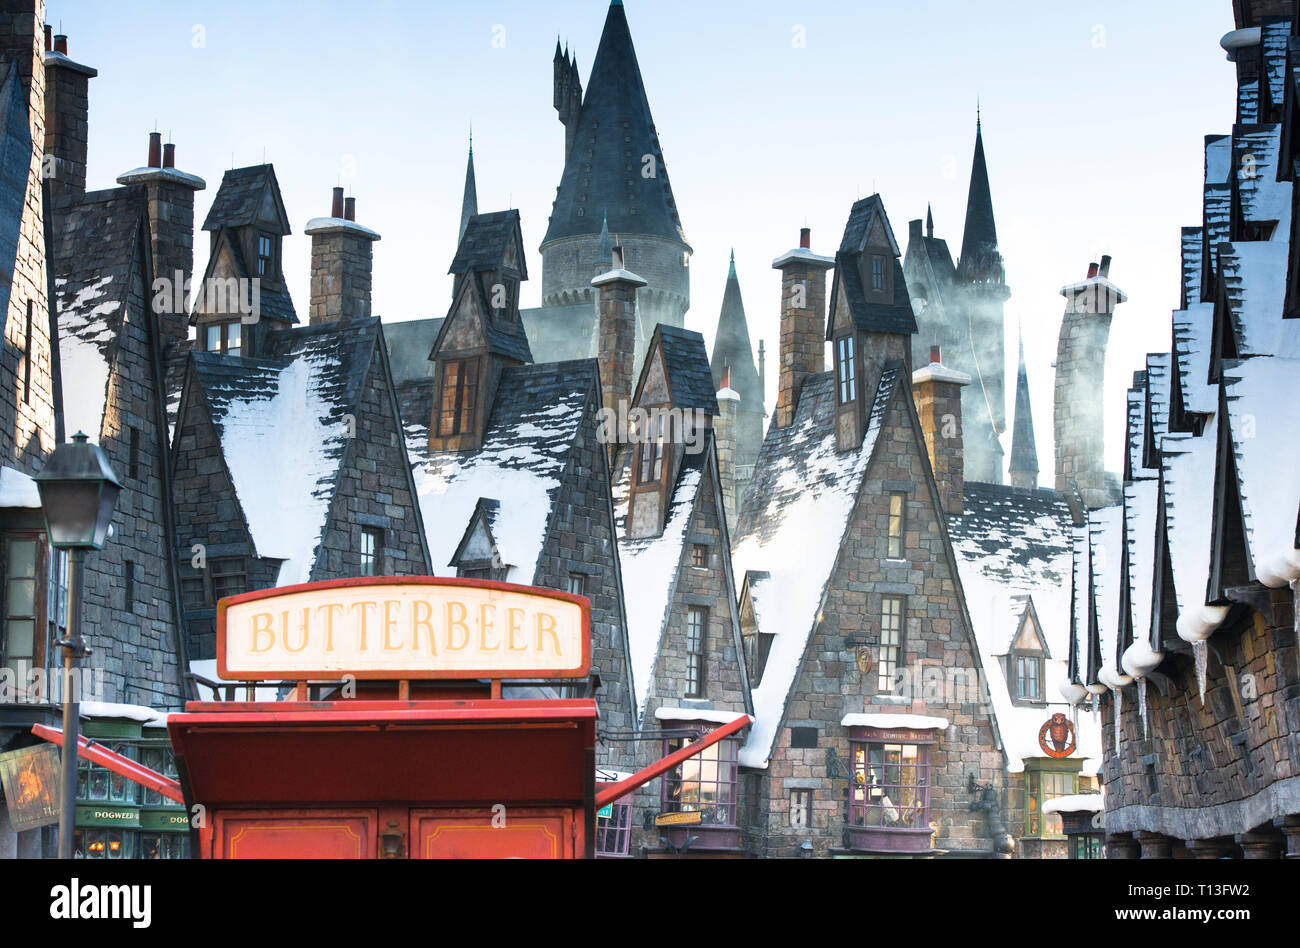 Landscape view of Hogsmeade, The Wizarding World of Harry Potter with a bright red Butterbeer sales stand in the foreground. No people in scene. Stock Photo